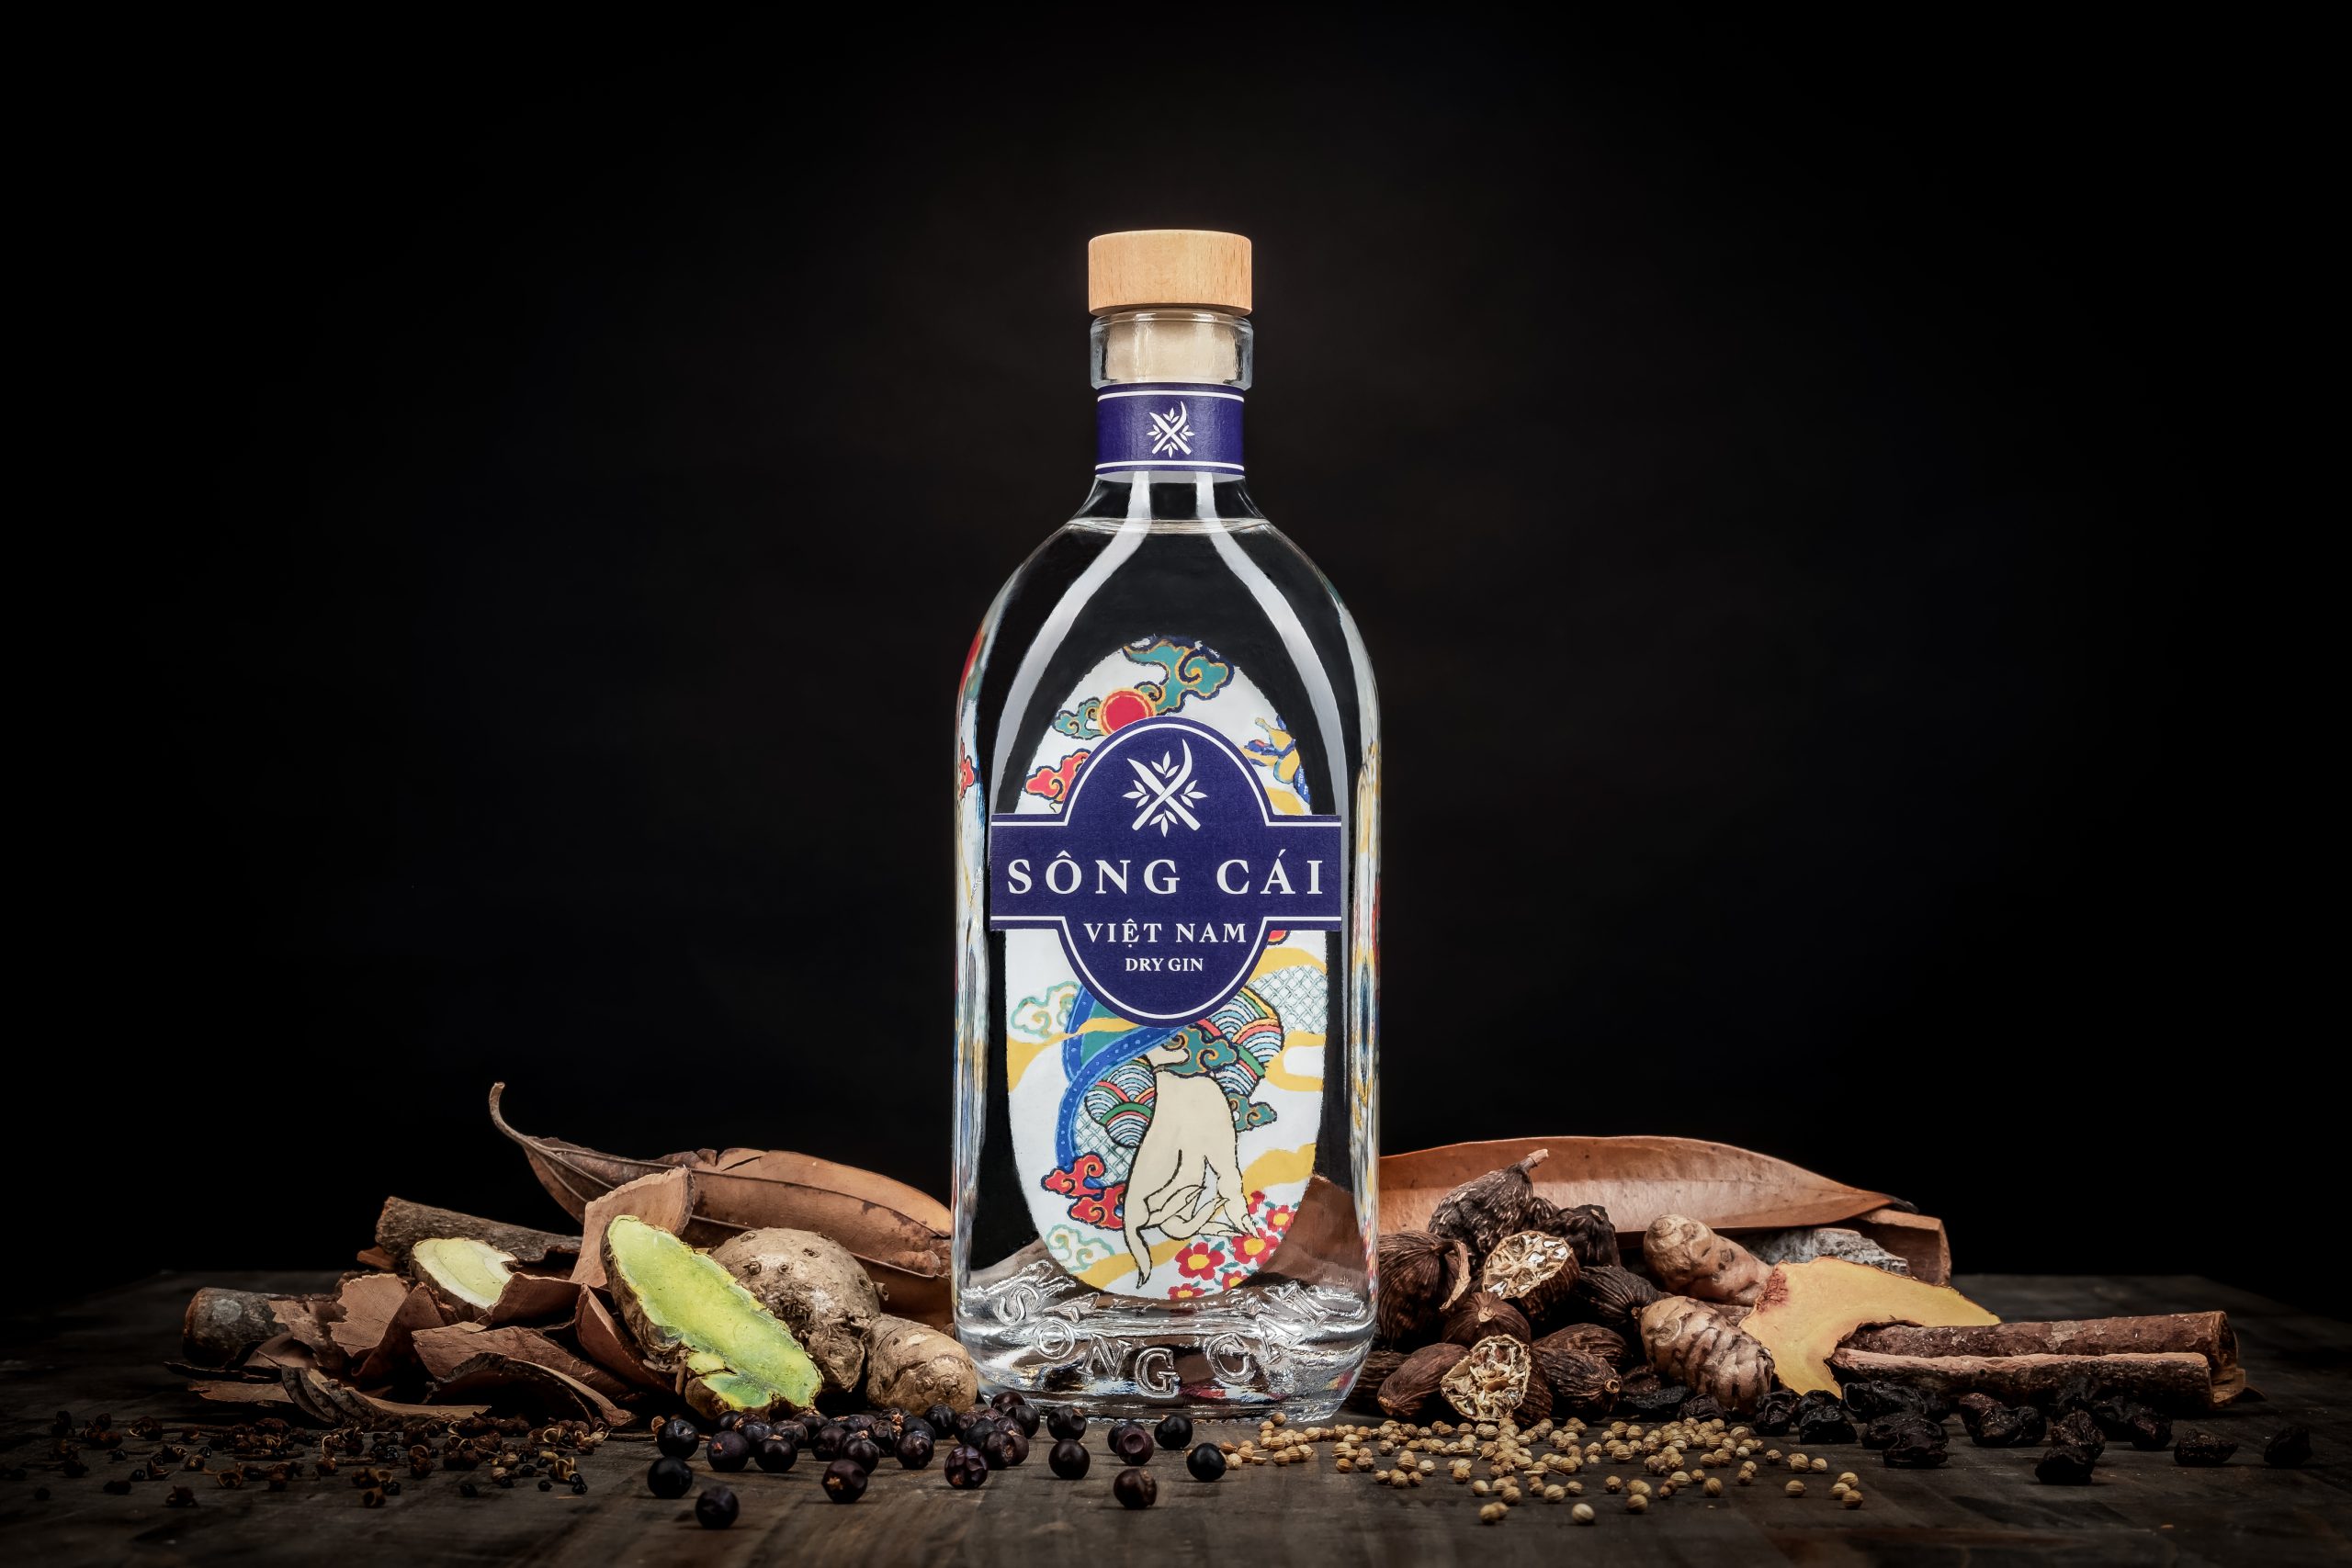 https://coolhunting.com/wp-content/uploads/2022/07/So%CC%82ng-Ca%CC%81i-Vie%CC%A3%CC%82t-Nam-Dry-Gin-With-botanicals-Horizontal-scaled.jpg